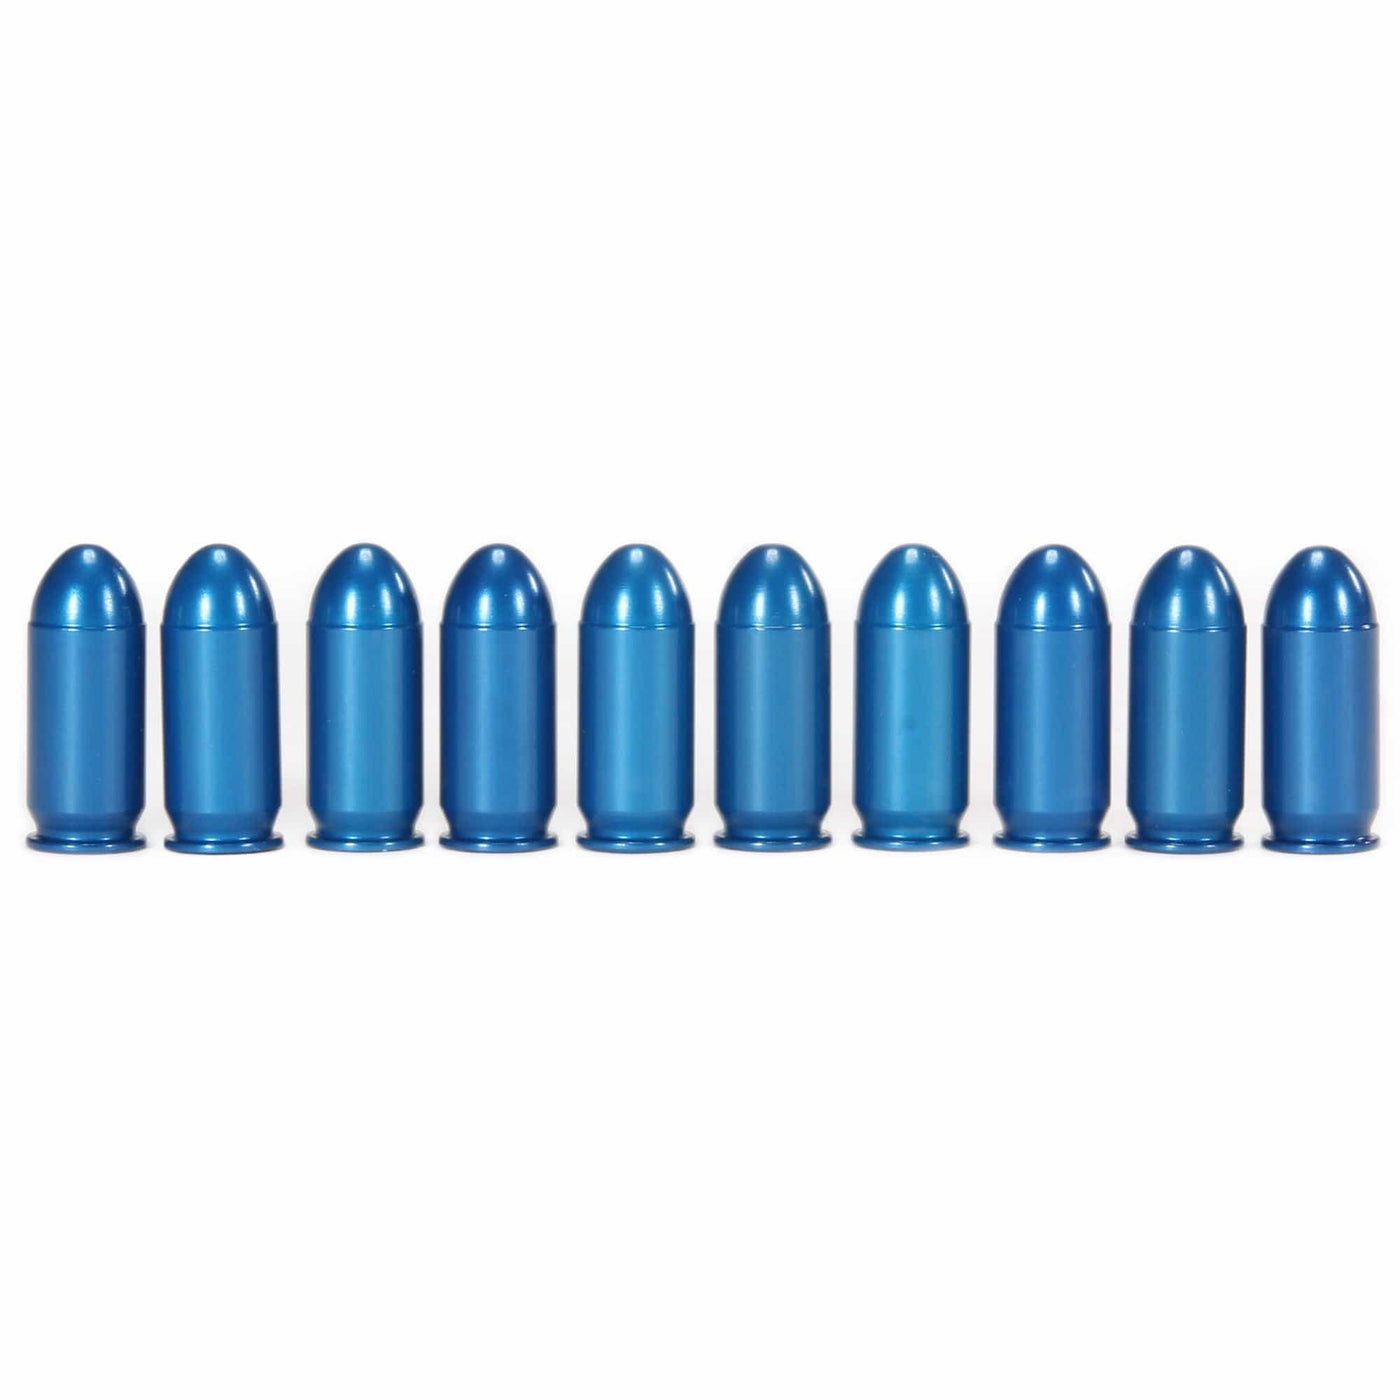 A-Zoom A-zoom Metal Snap Cap Blue - .45acp 10-pack Ammo